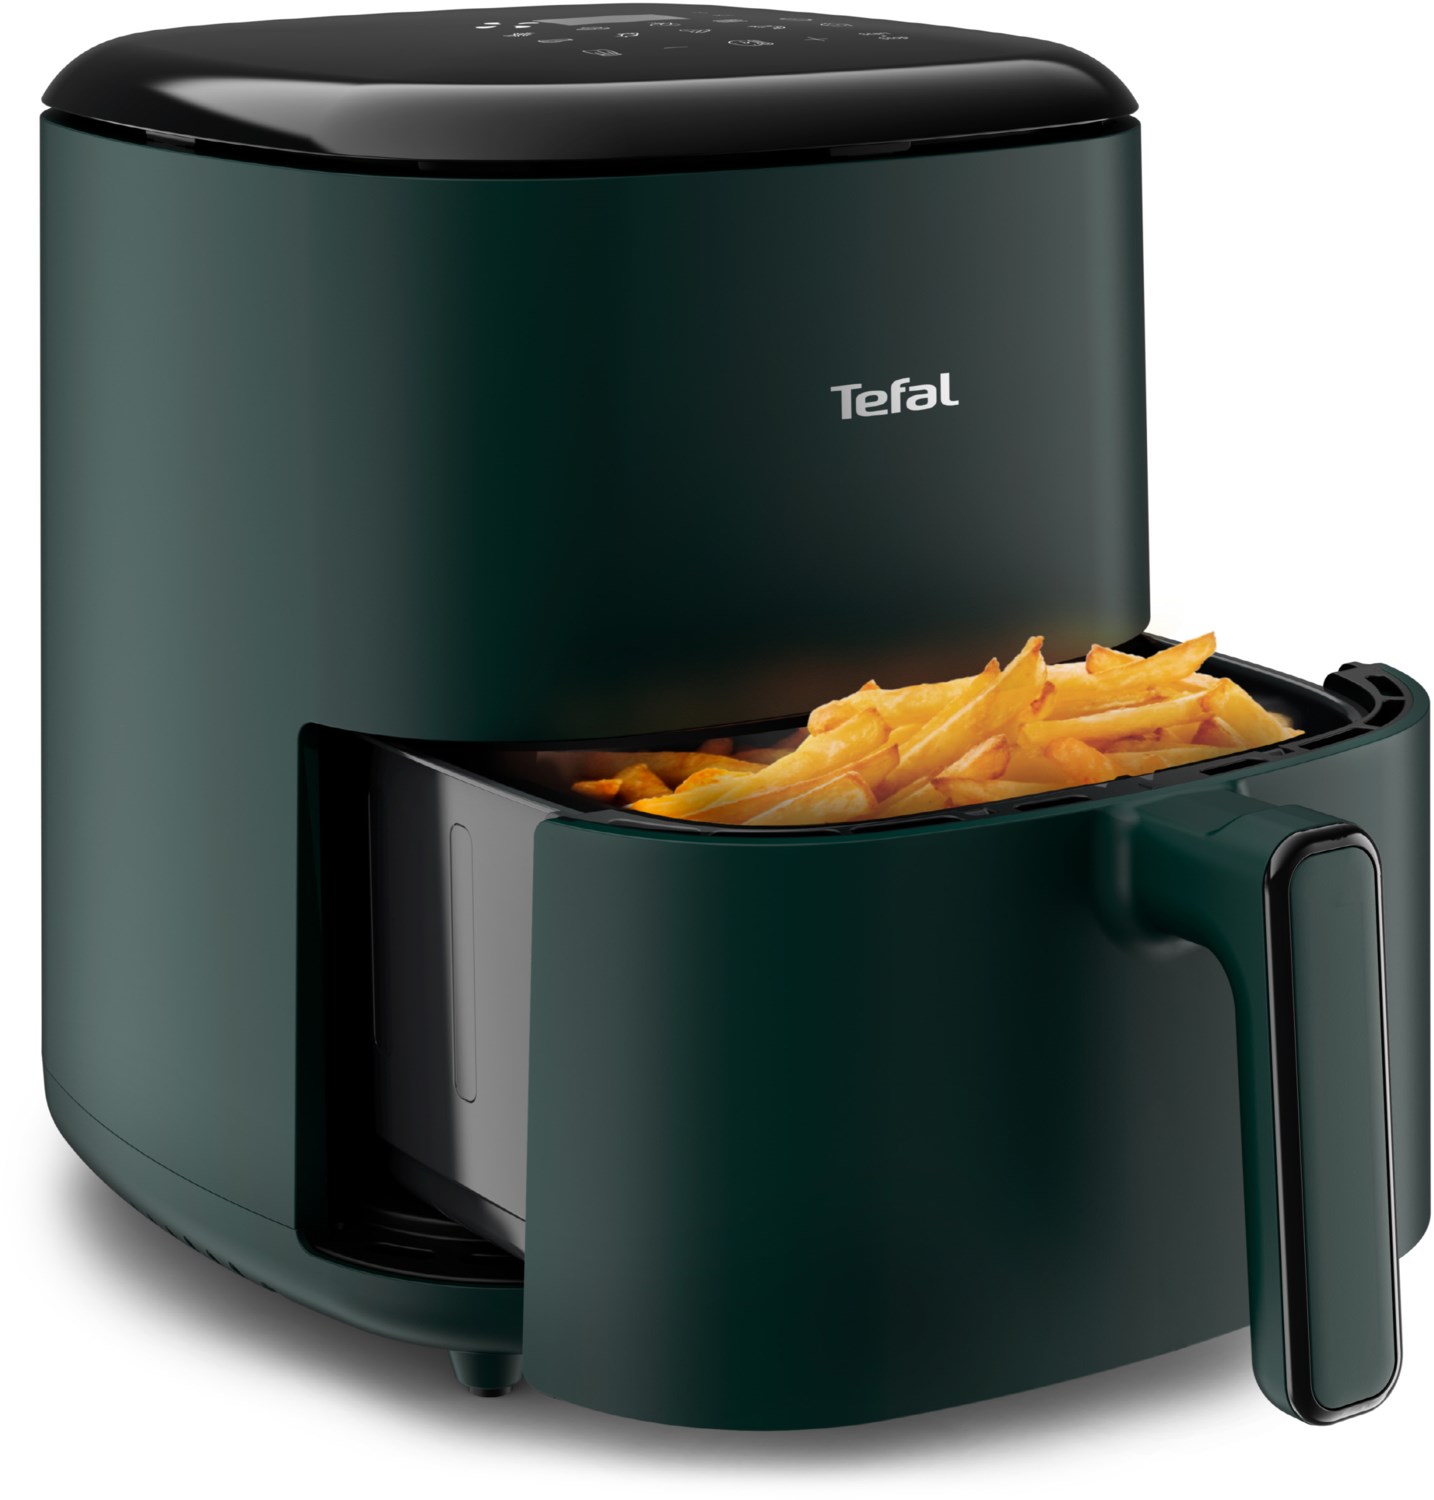 EY2453 Easy Fry Max Heißluft-Fritteuse von Tefal